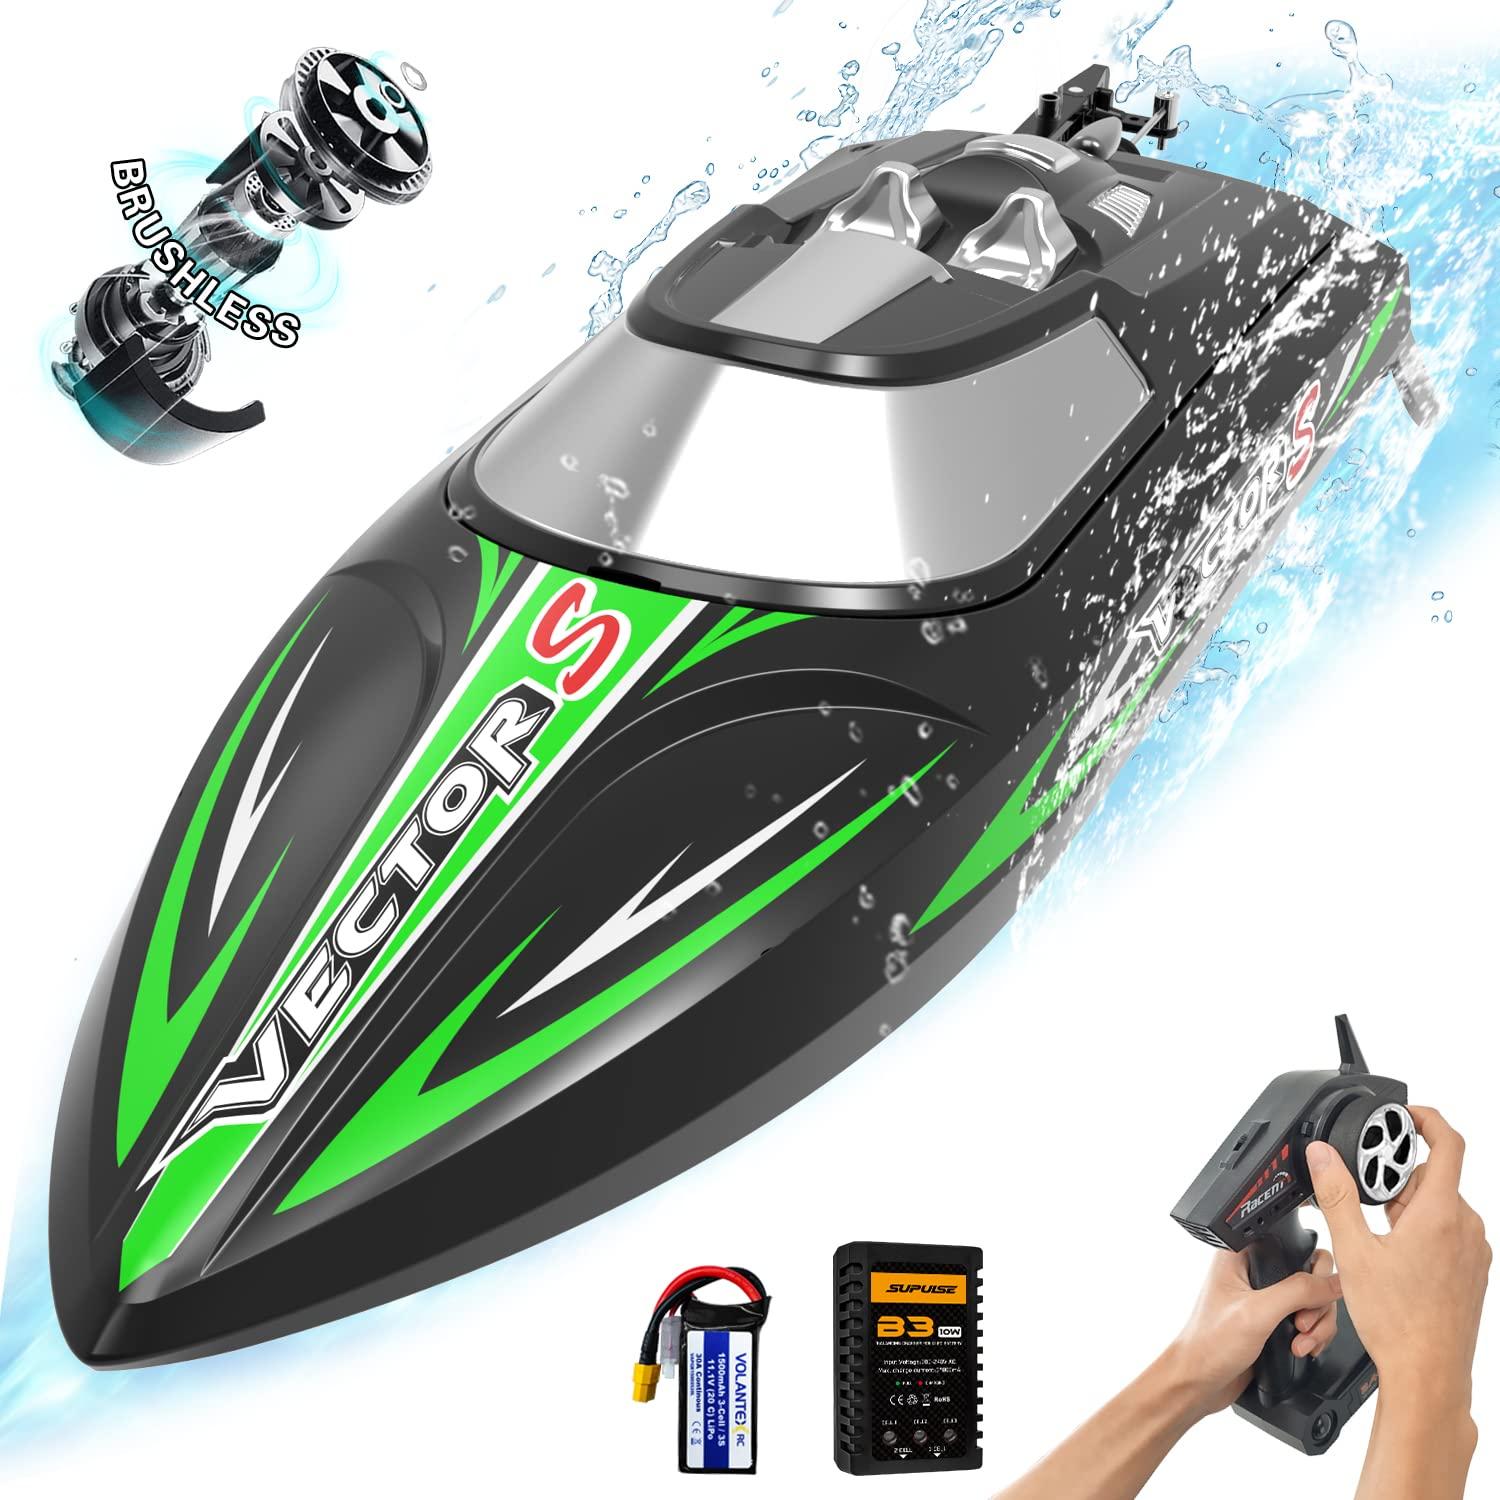 Vector 30 Rc Boat: Must-Have Accessories 